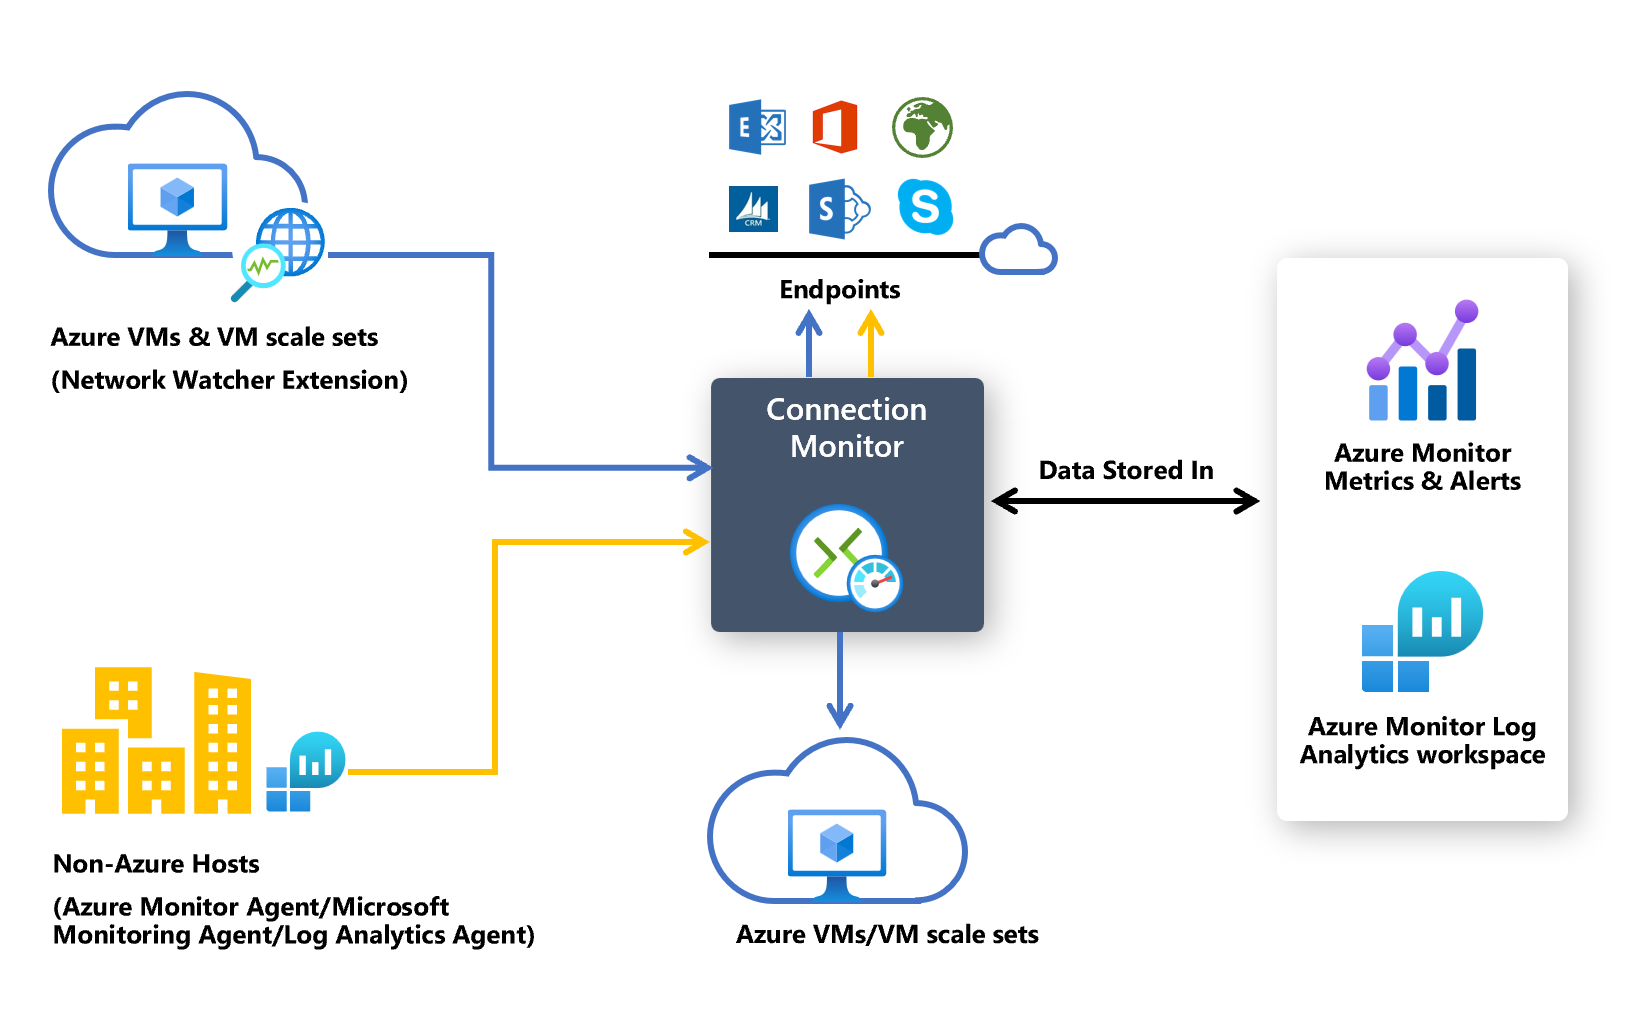 Diagram showing how Connection Monitor interacts with Azure VMs, non-Azure hosts, endpoints and data storage locations.